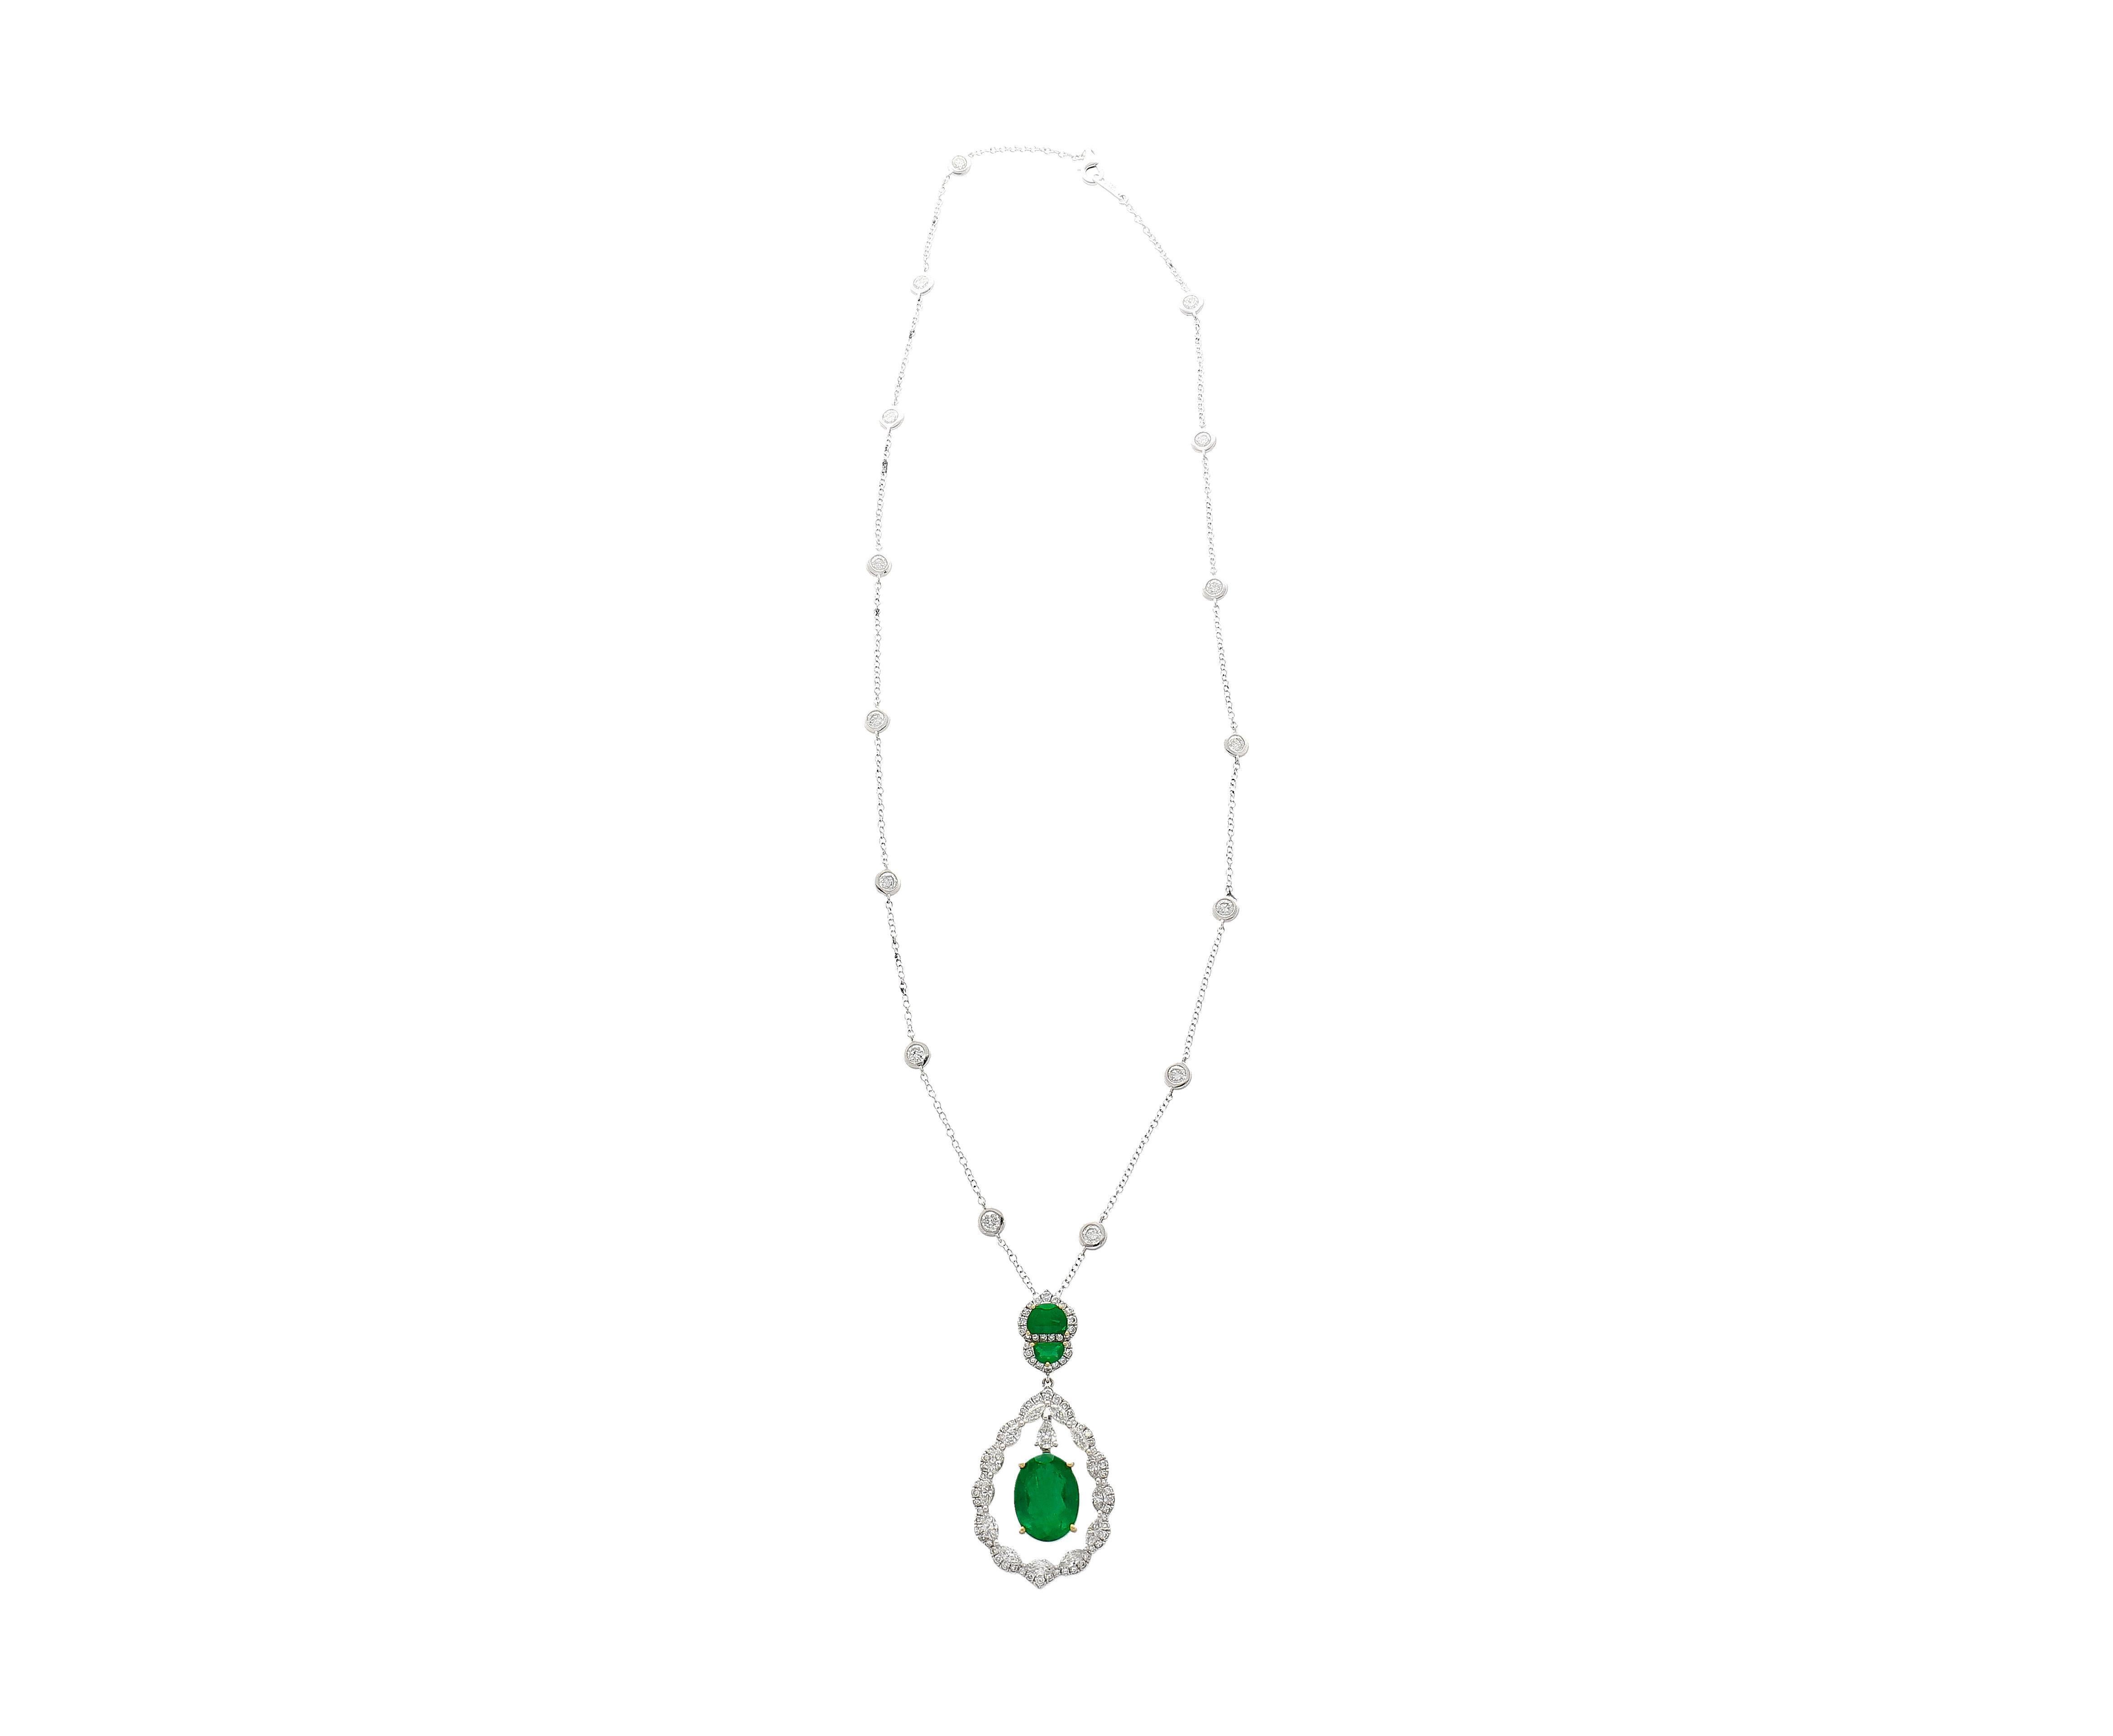 6.42 Carat Floating Emerald with Diamond & Emeralds in 18K Pendant Necklace In New Condition For Sale In Miami, FL